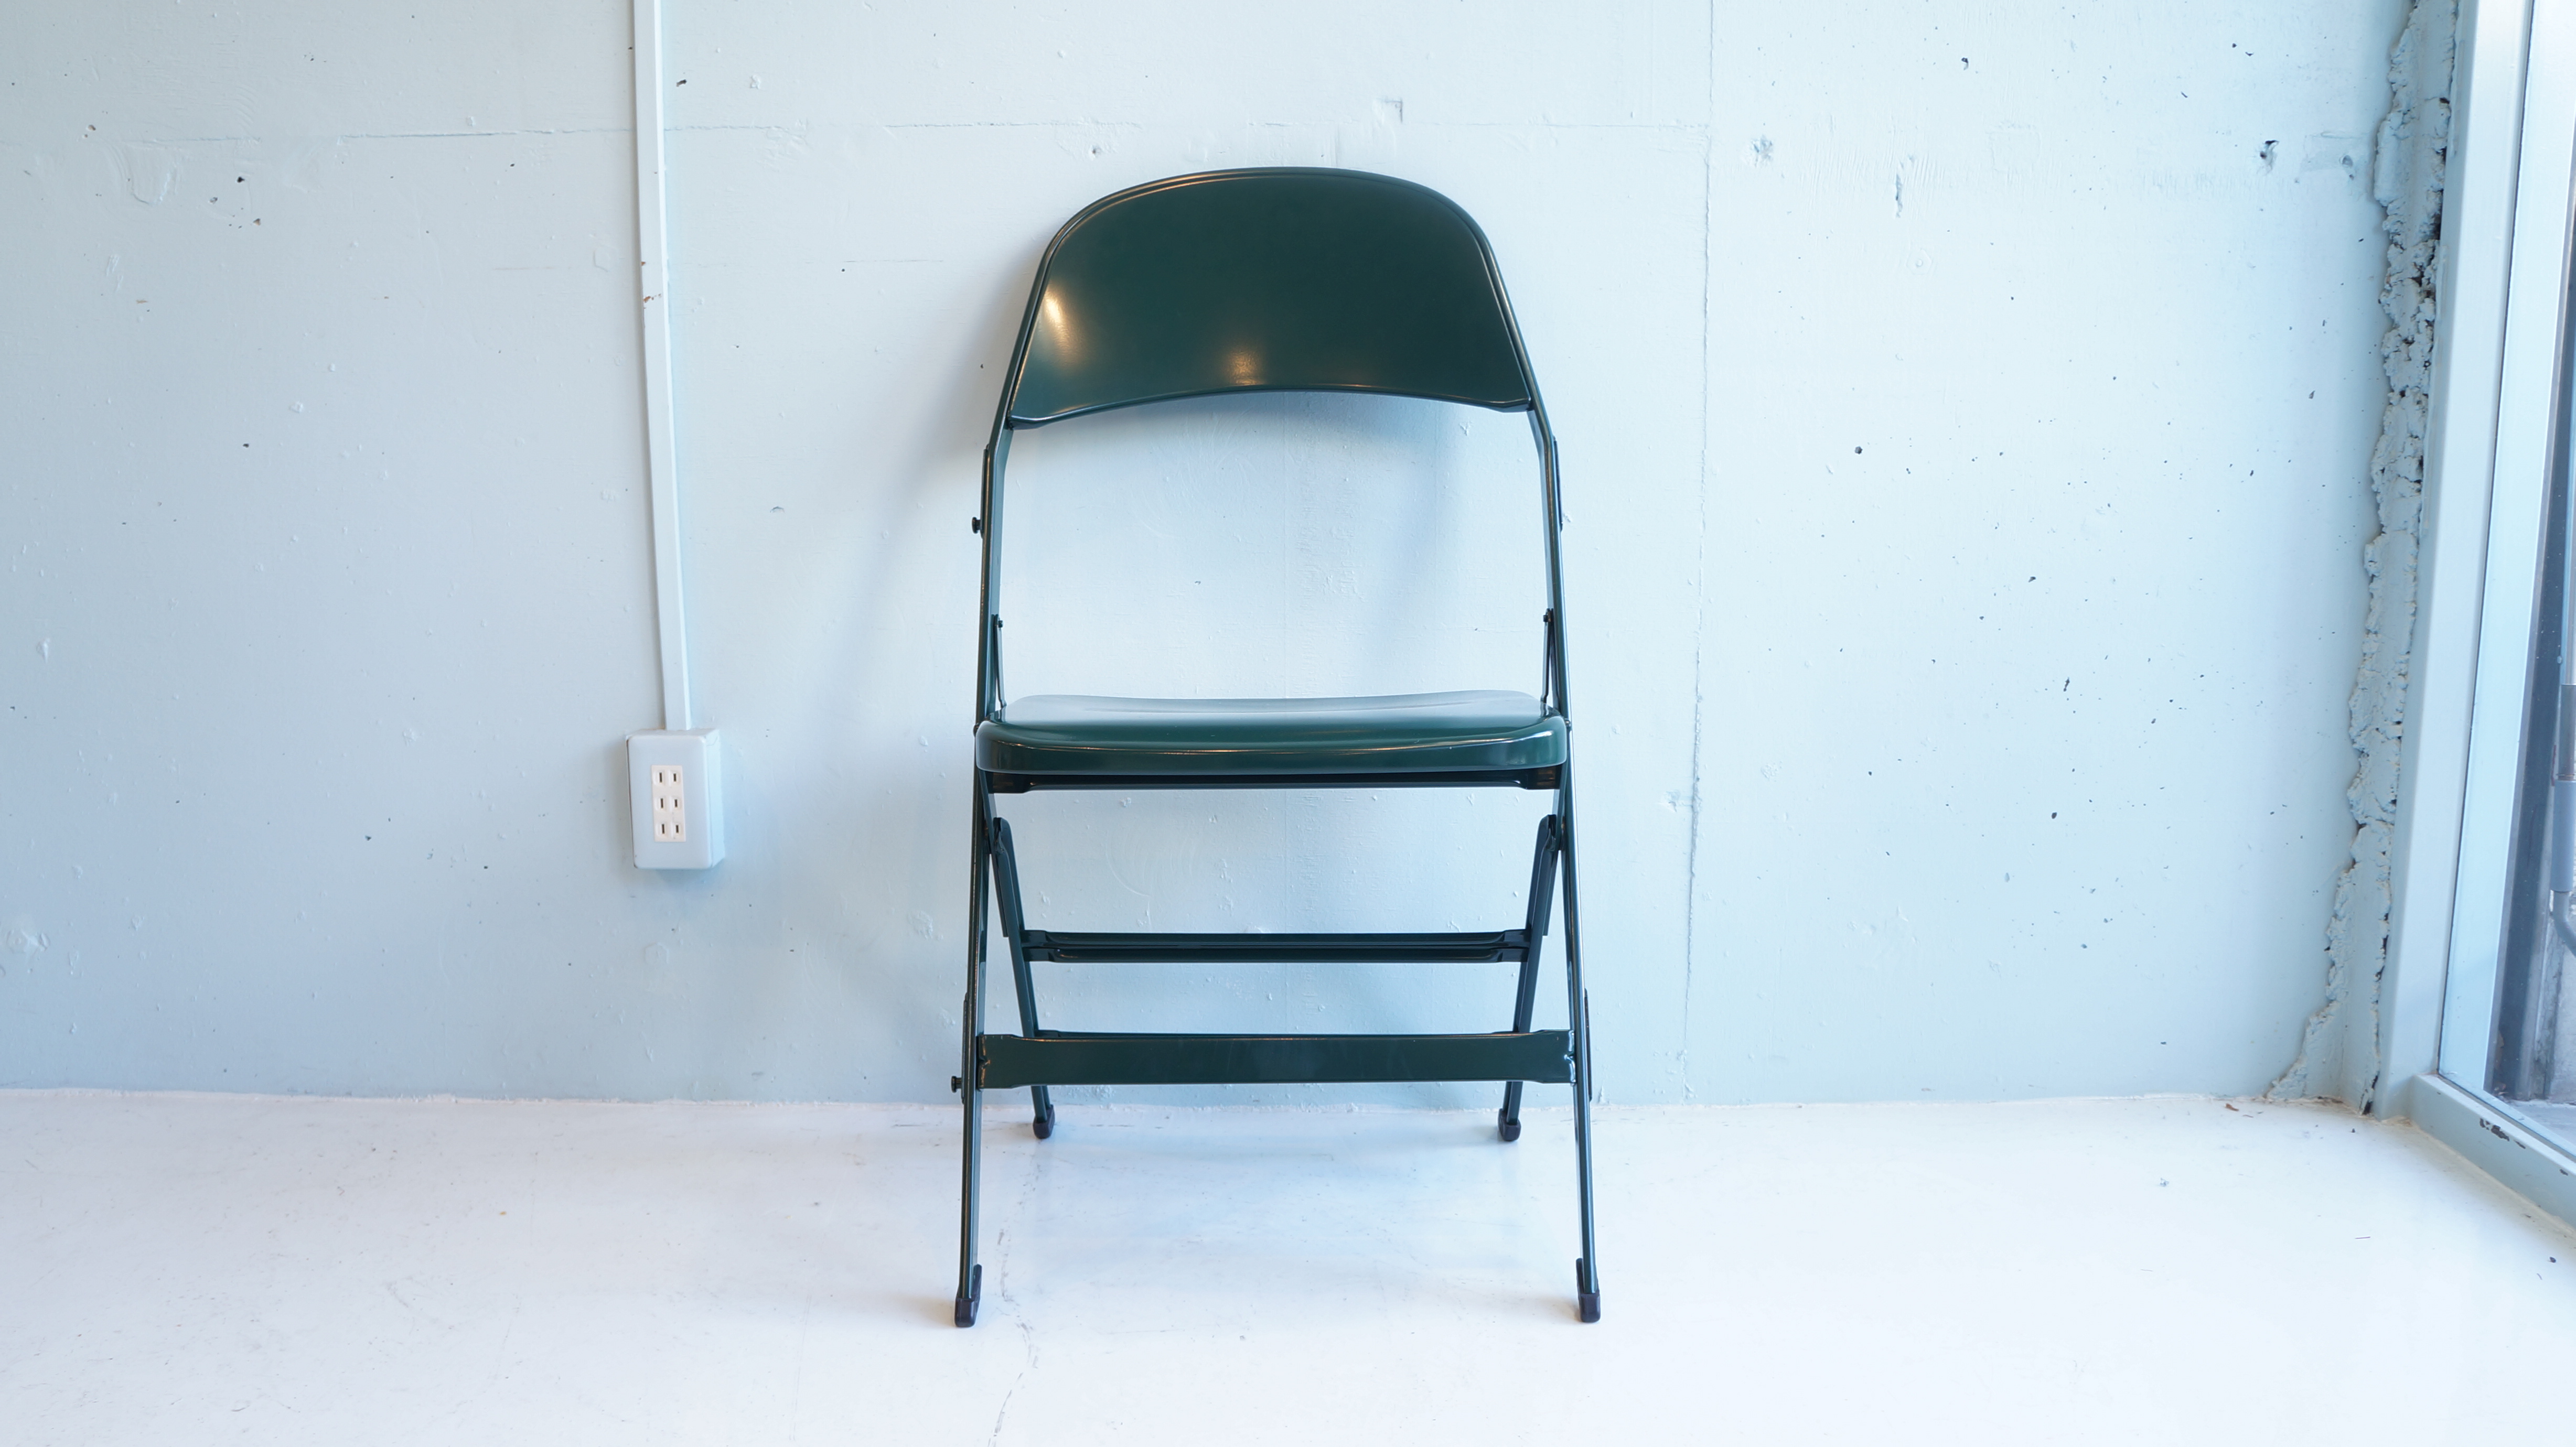 PACIFIC FURNITURE SERVICE ALL STEEL FOLDING CHAIR made by CLARIN